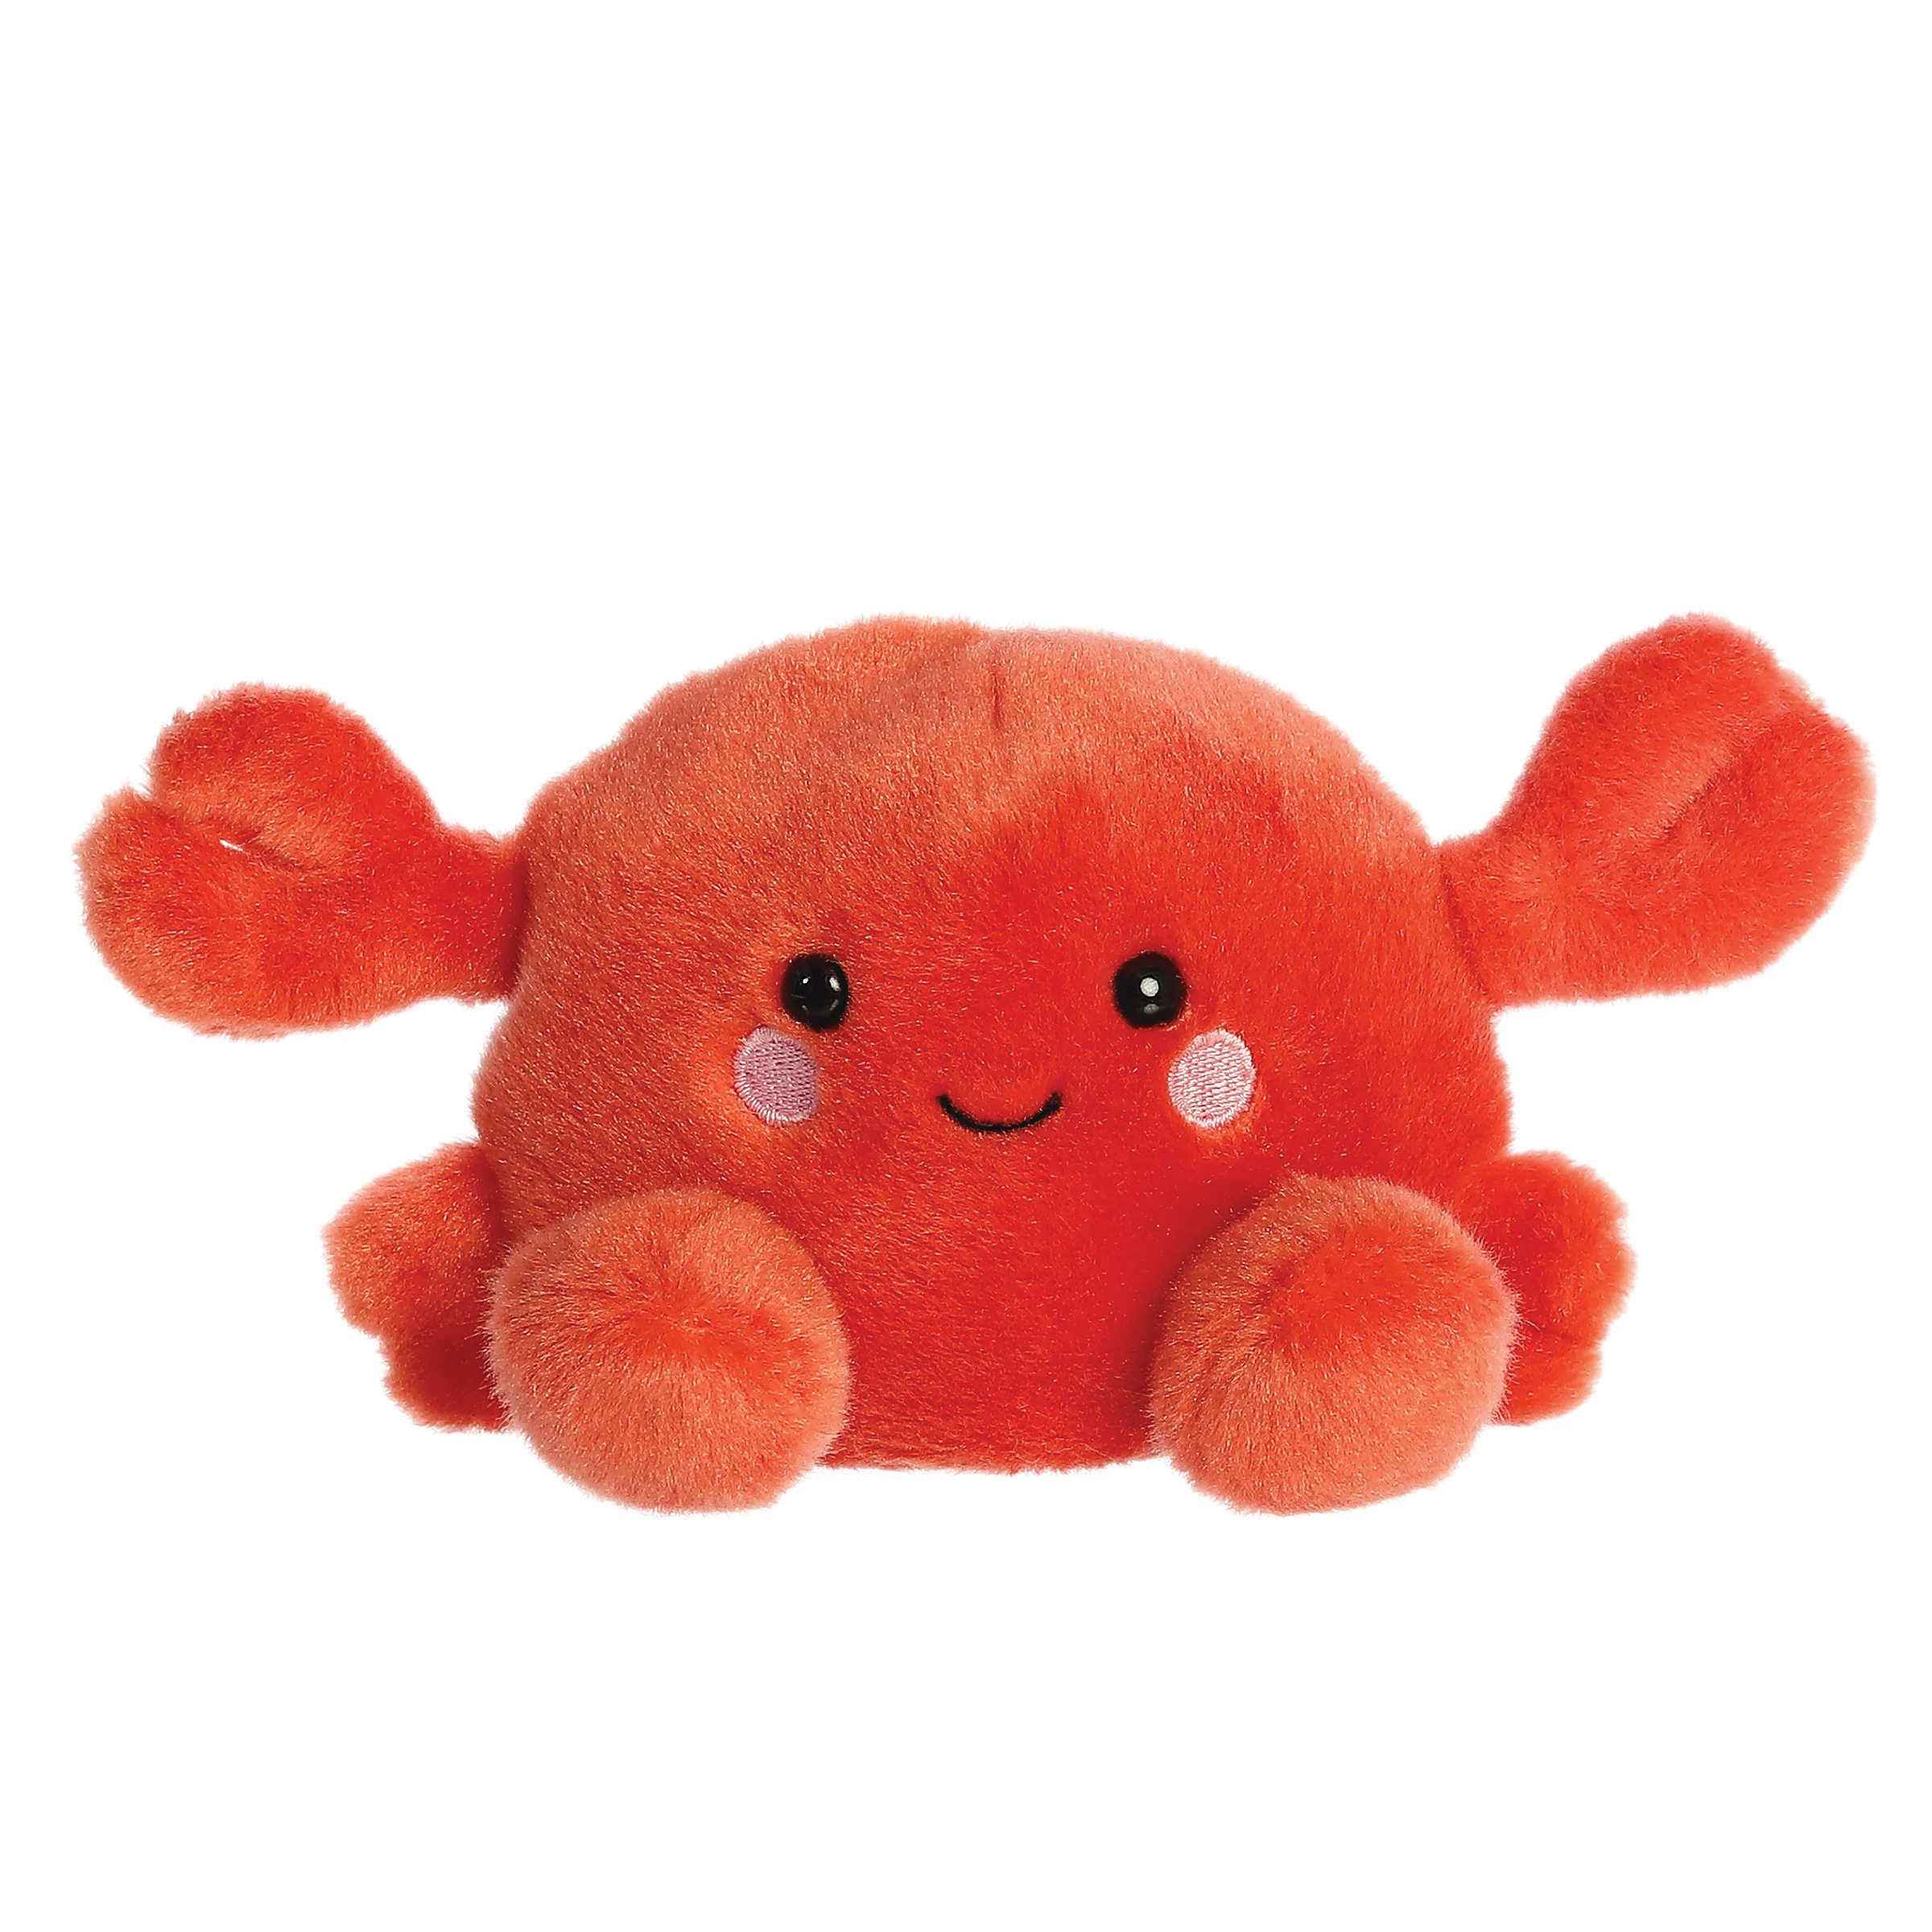 Aurora Palm Pals Series 33680 Snippy Crab Toy, All, Plush, Red - 1